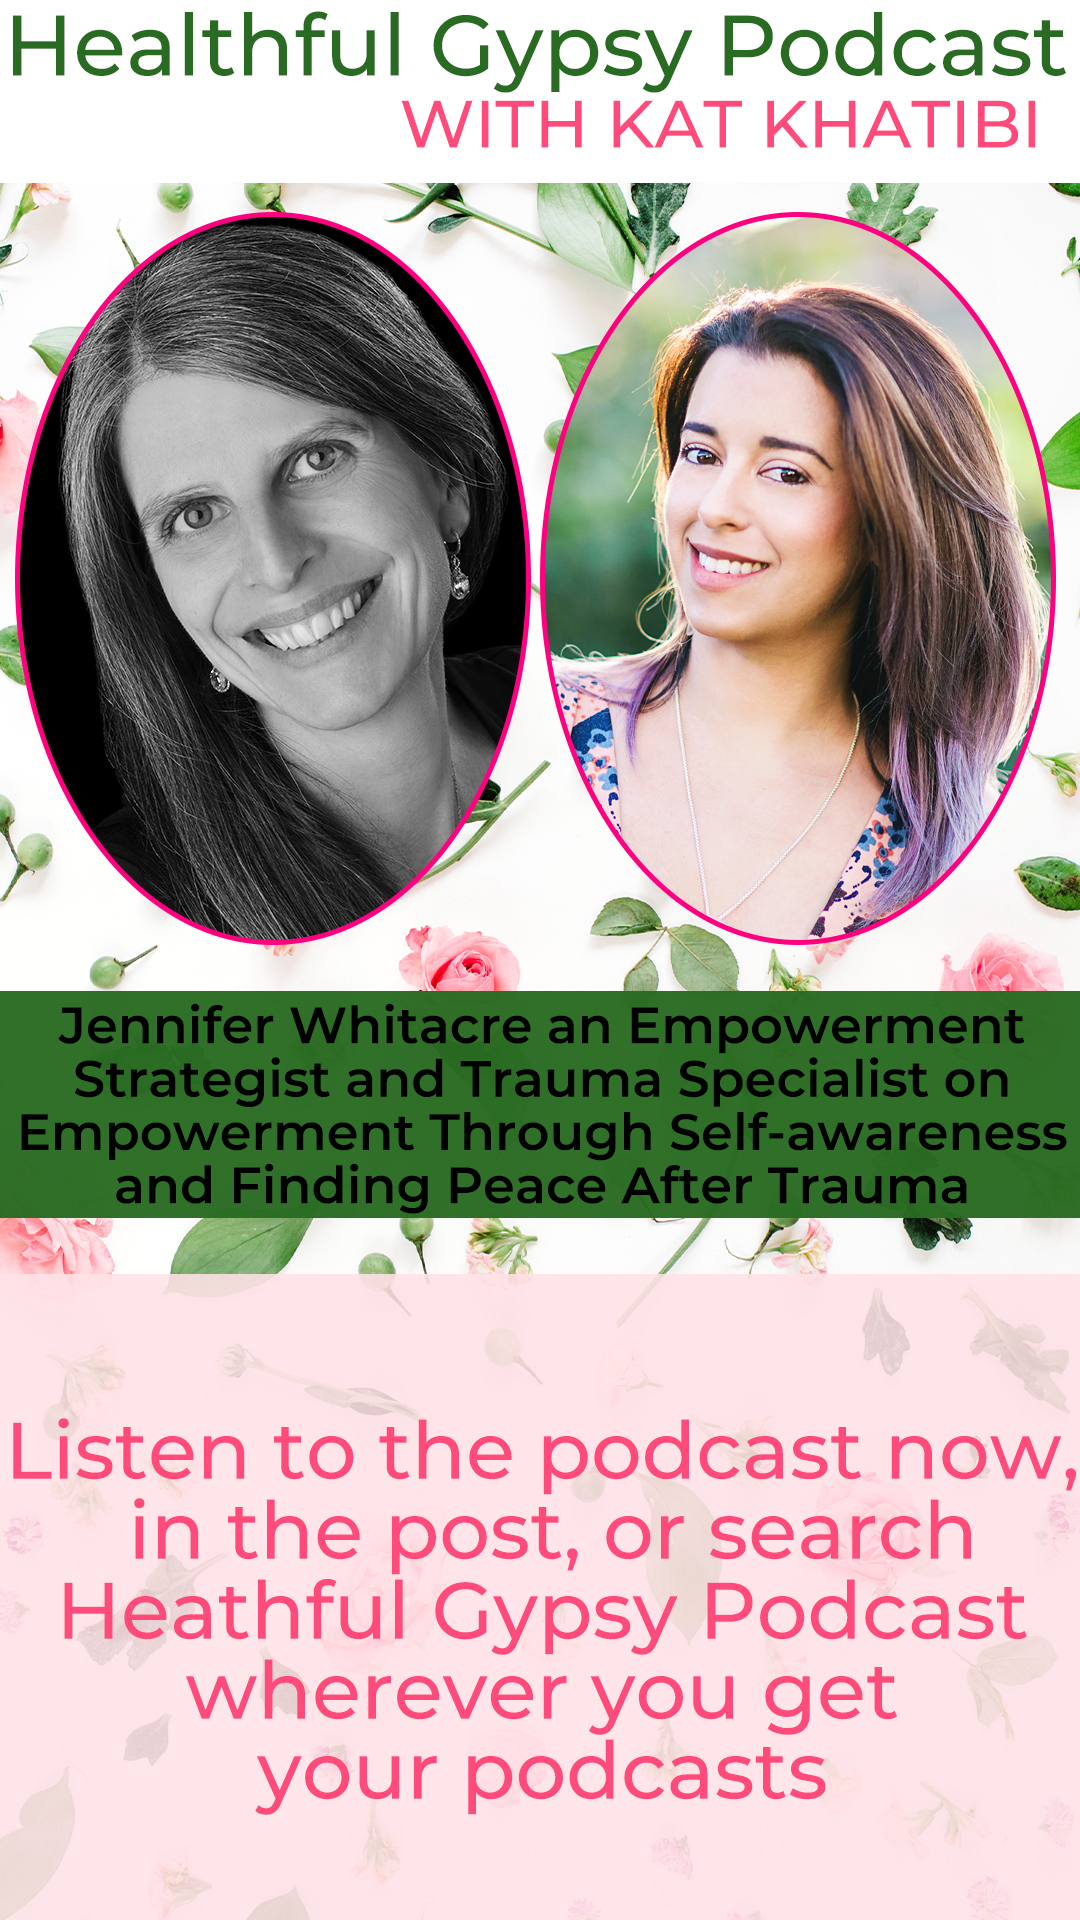 Jennifer Whitacre an Empowerment Strategist and Trauma Specialist on Empowerment Through Self-awareness and Finding Peace After Trauma